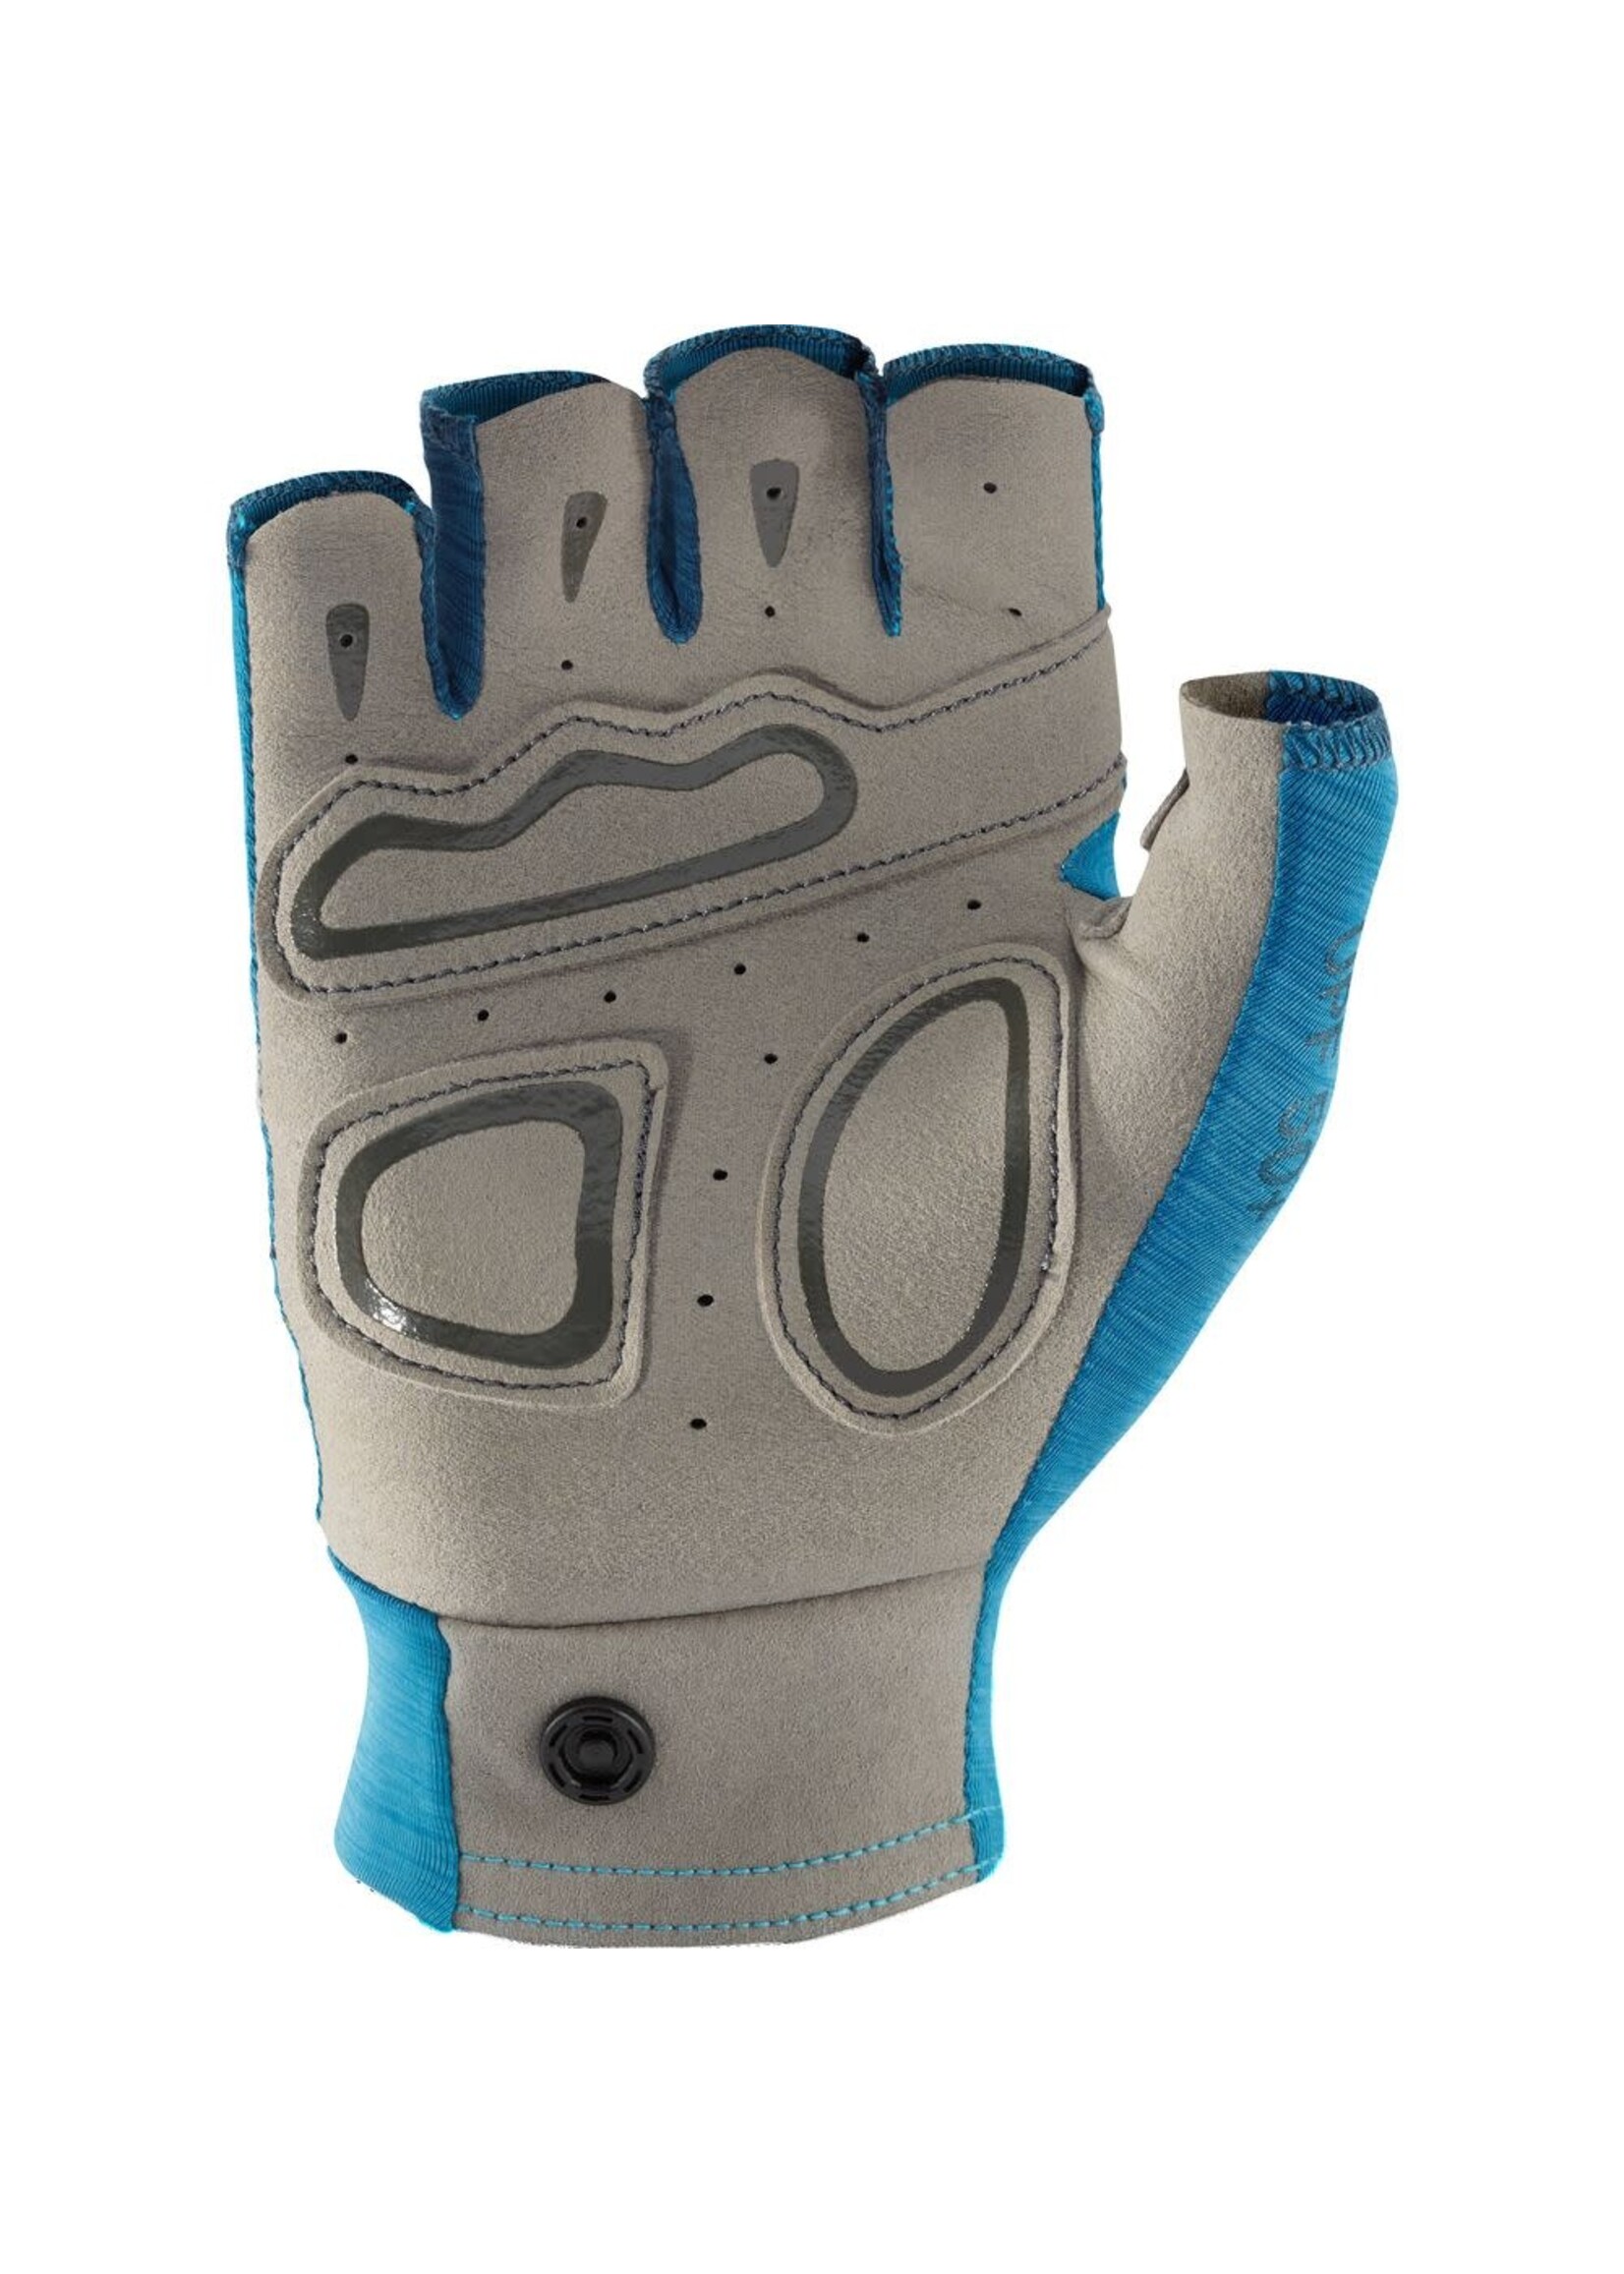 NRS NRS Womens Boater's Glove Fjord - M